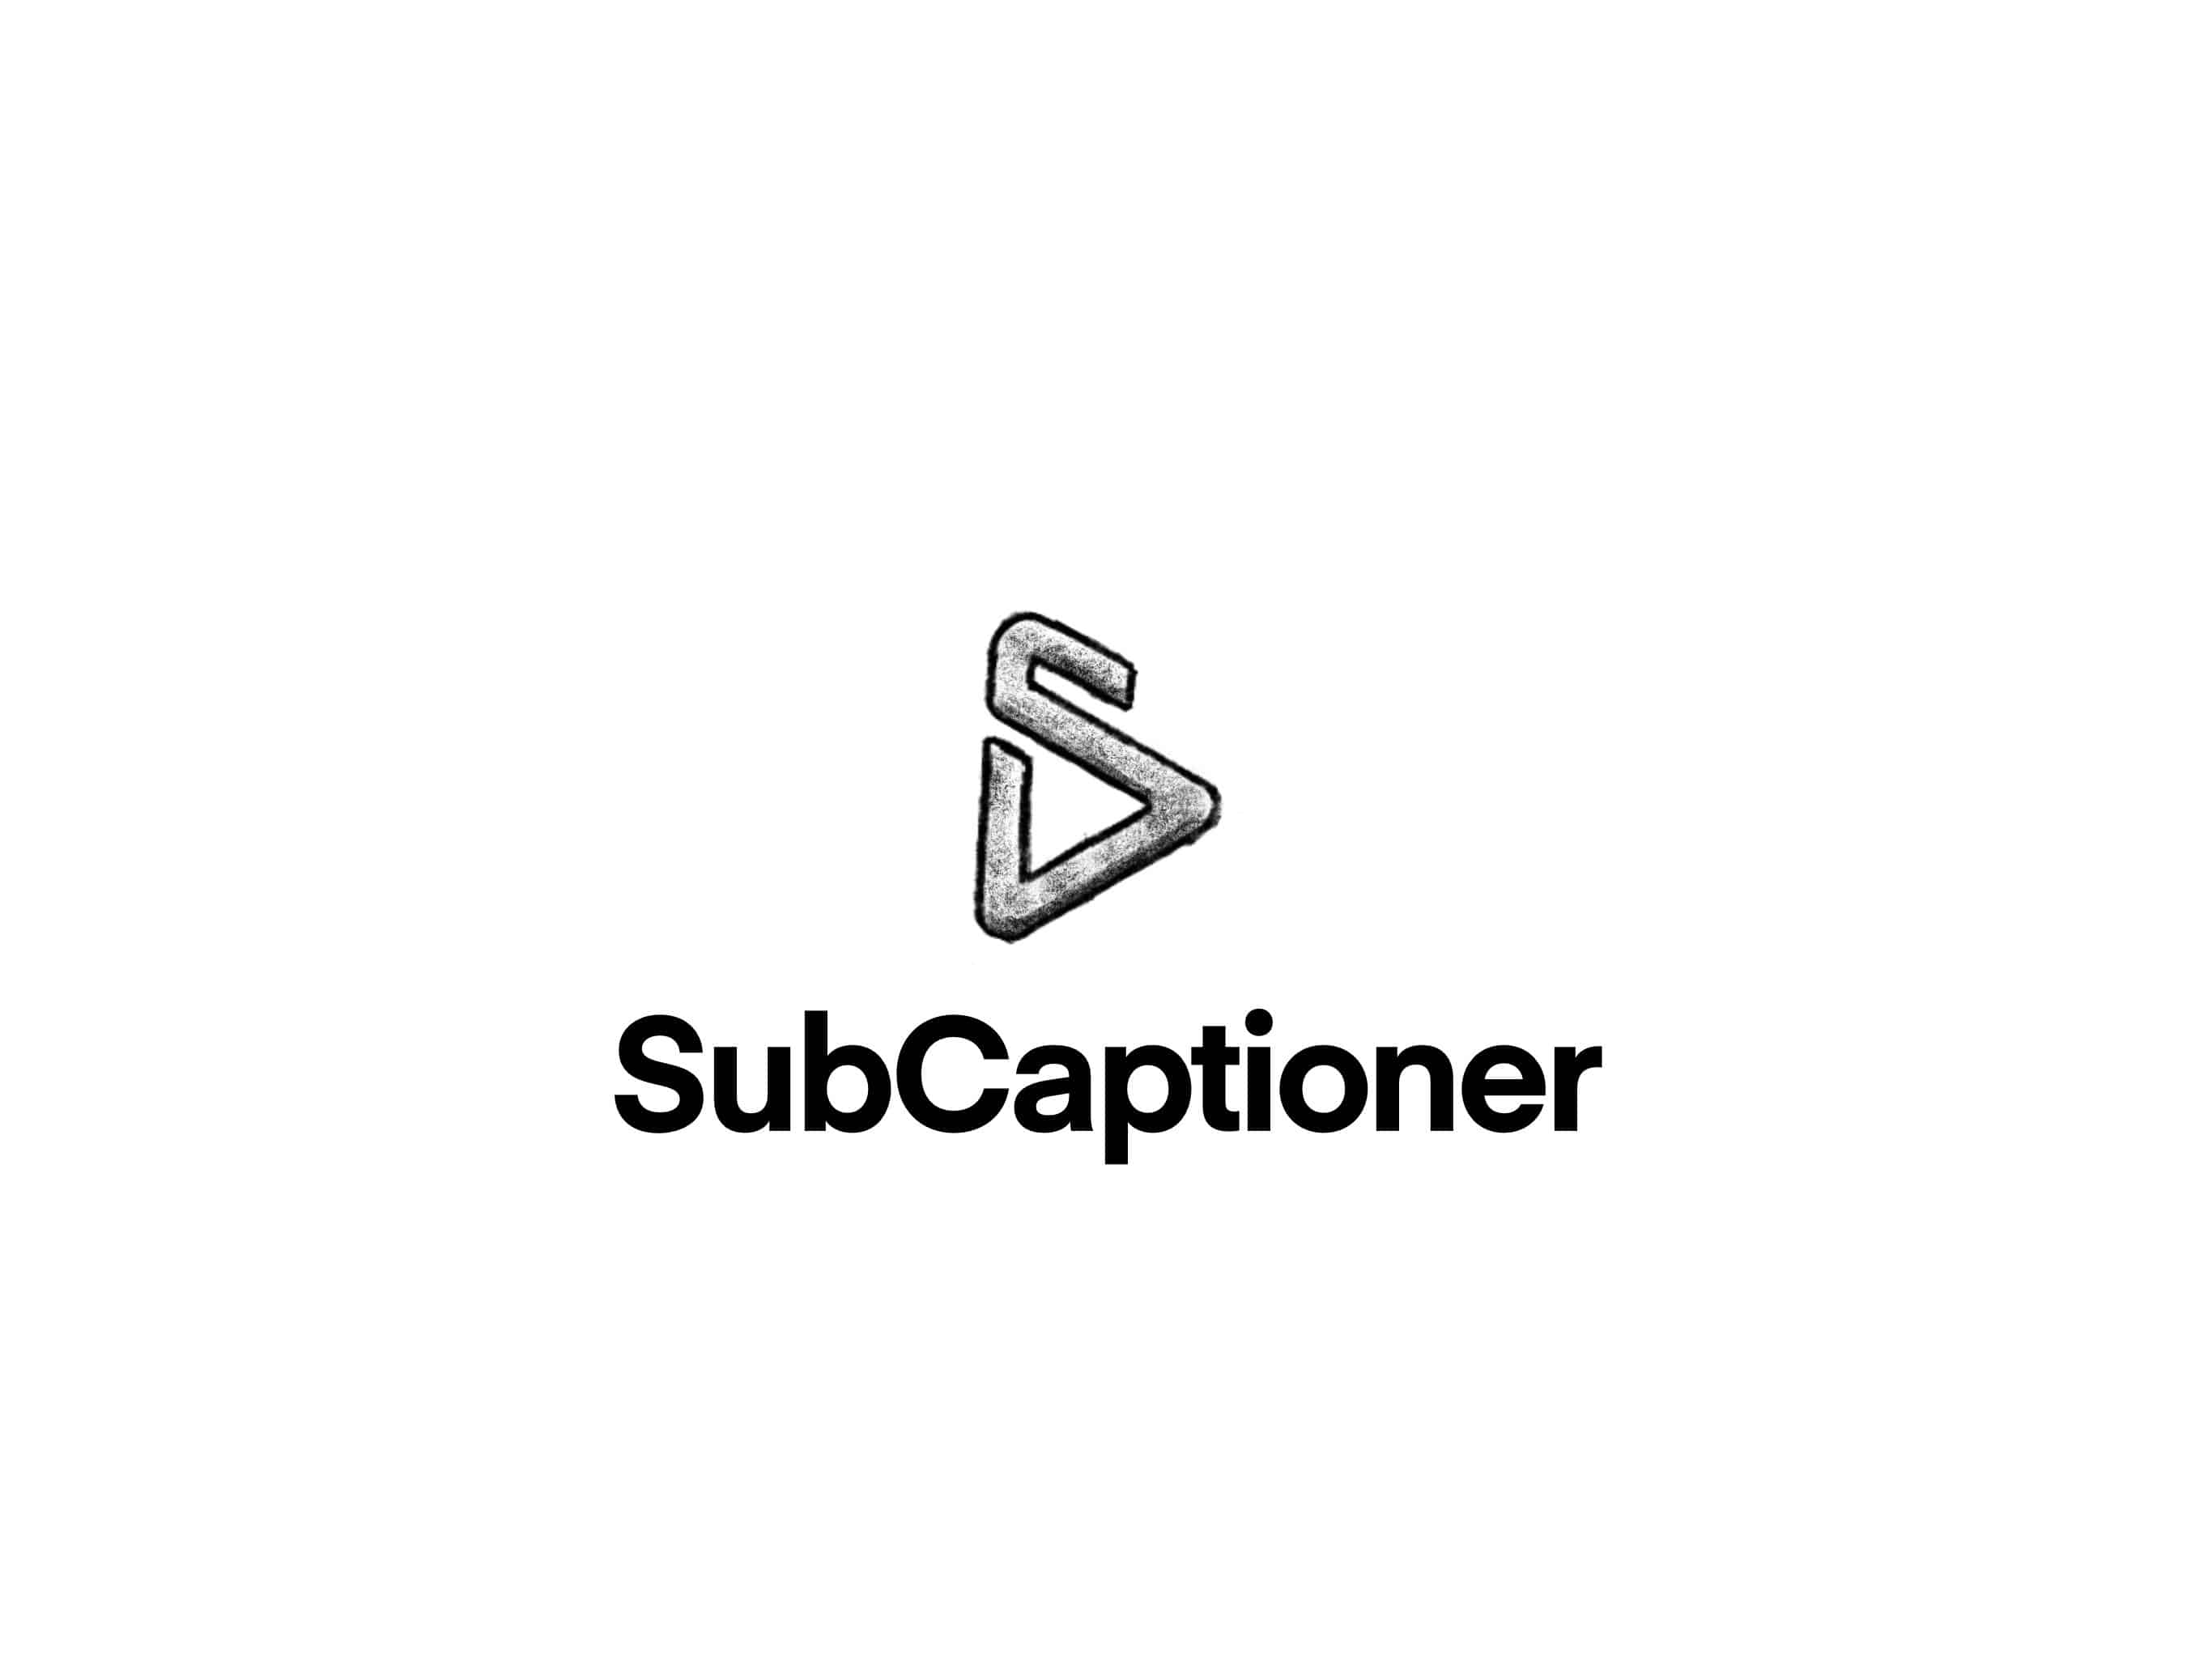 SubCaptioner early logo sketch concept - play button